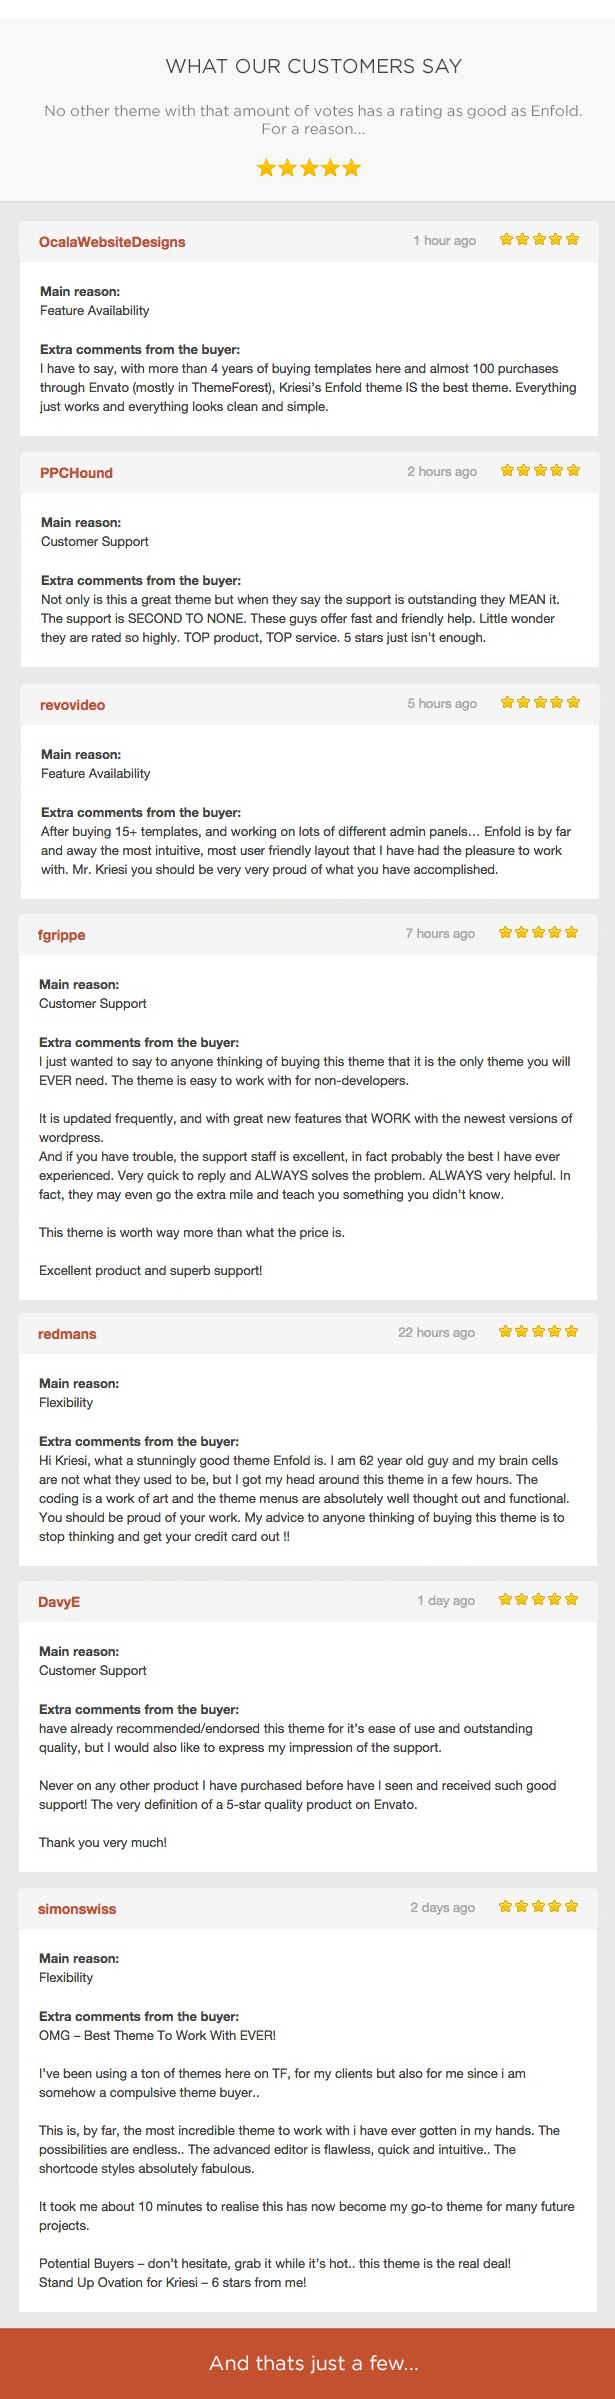 Preview of comments and reviews on the site.